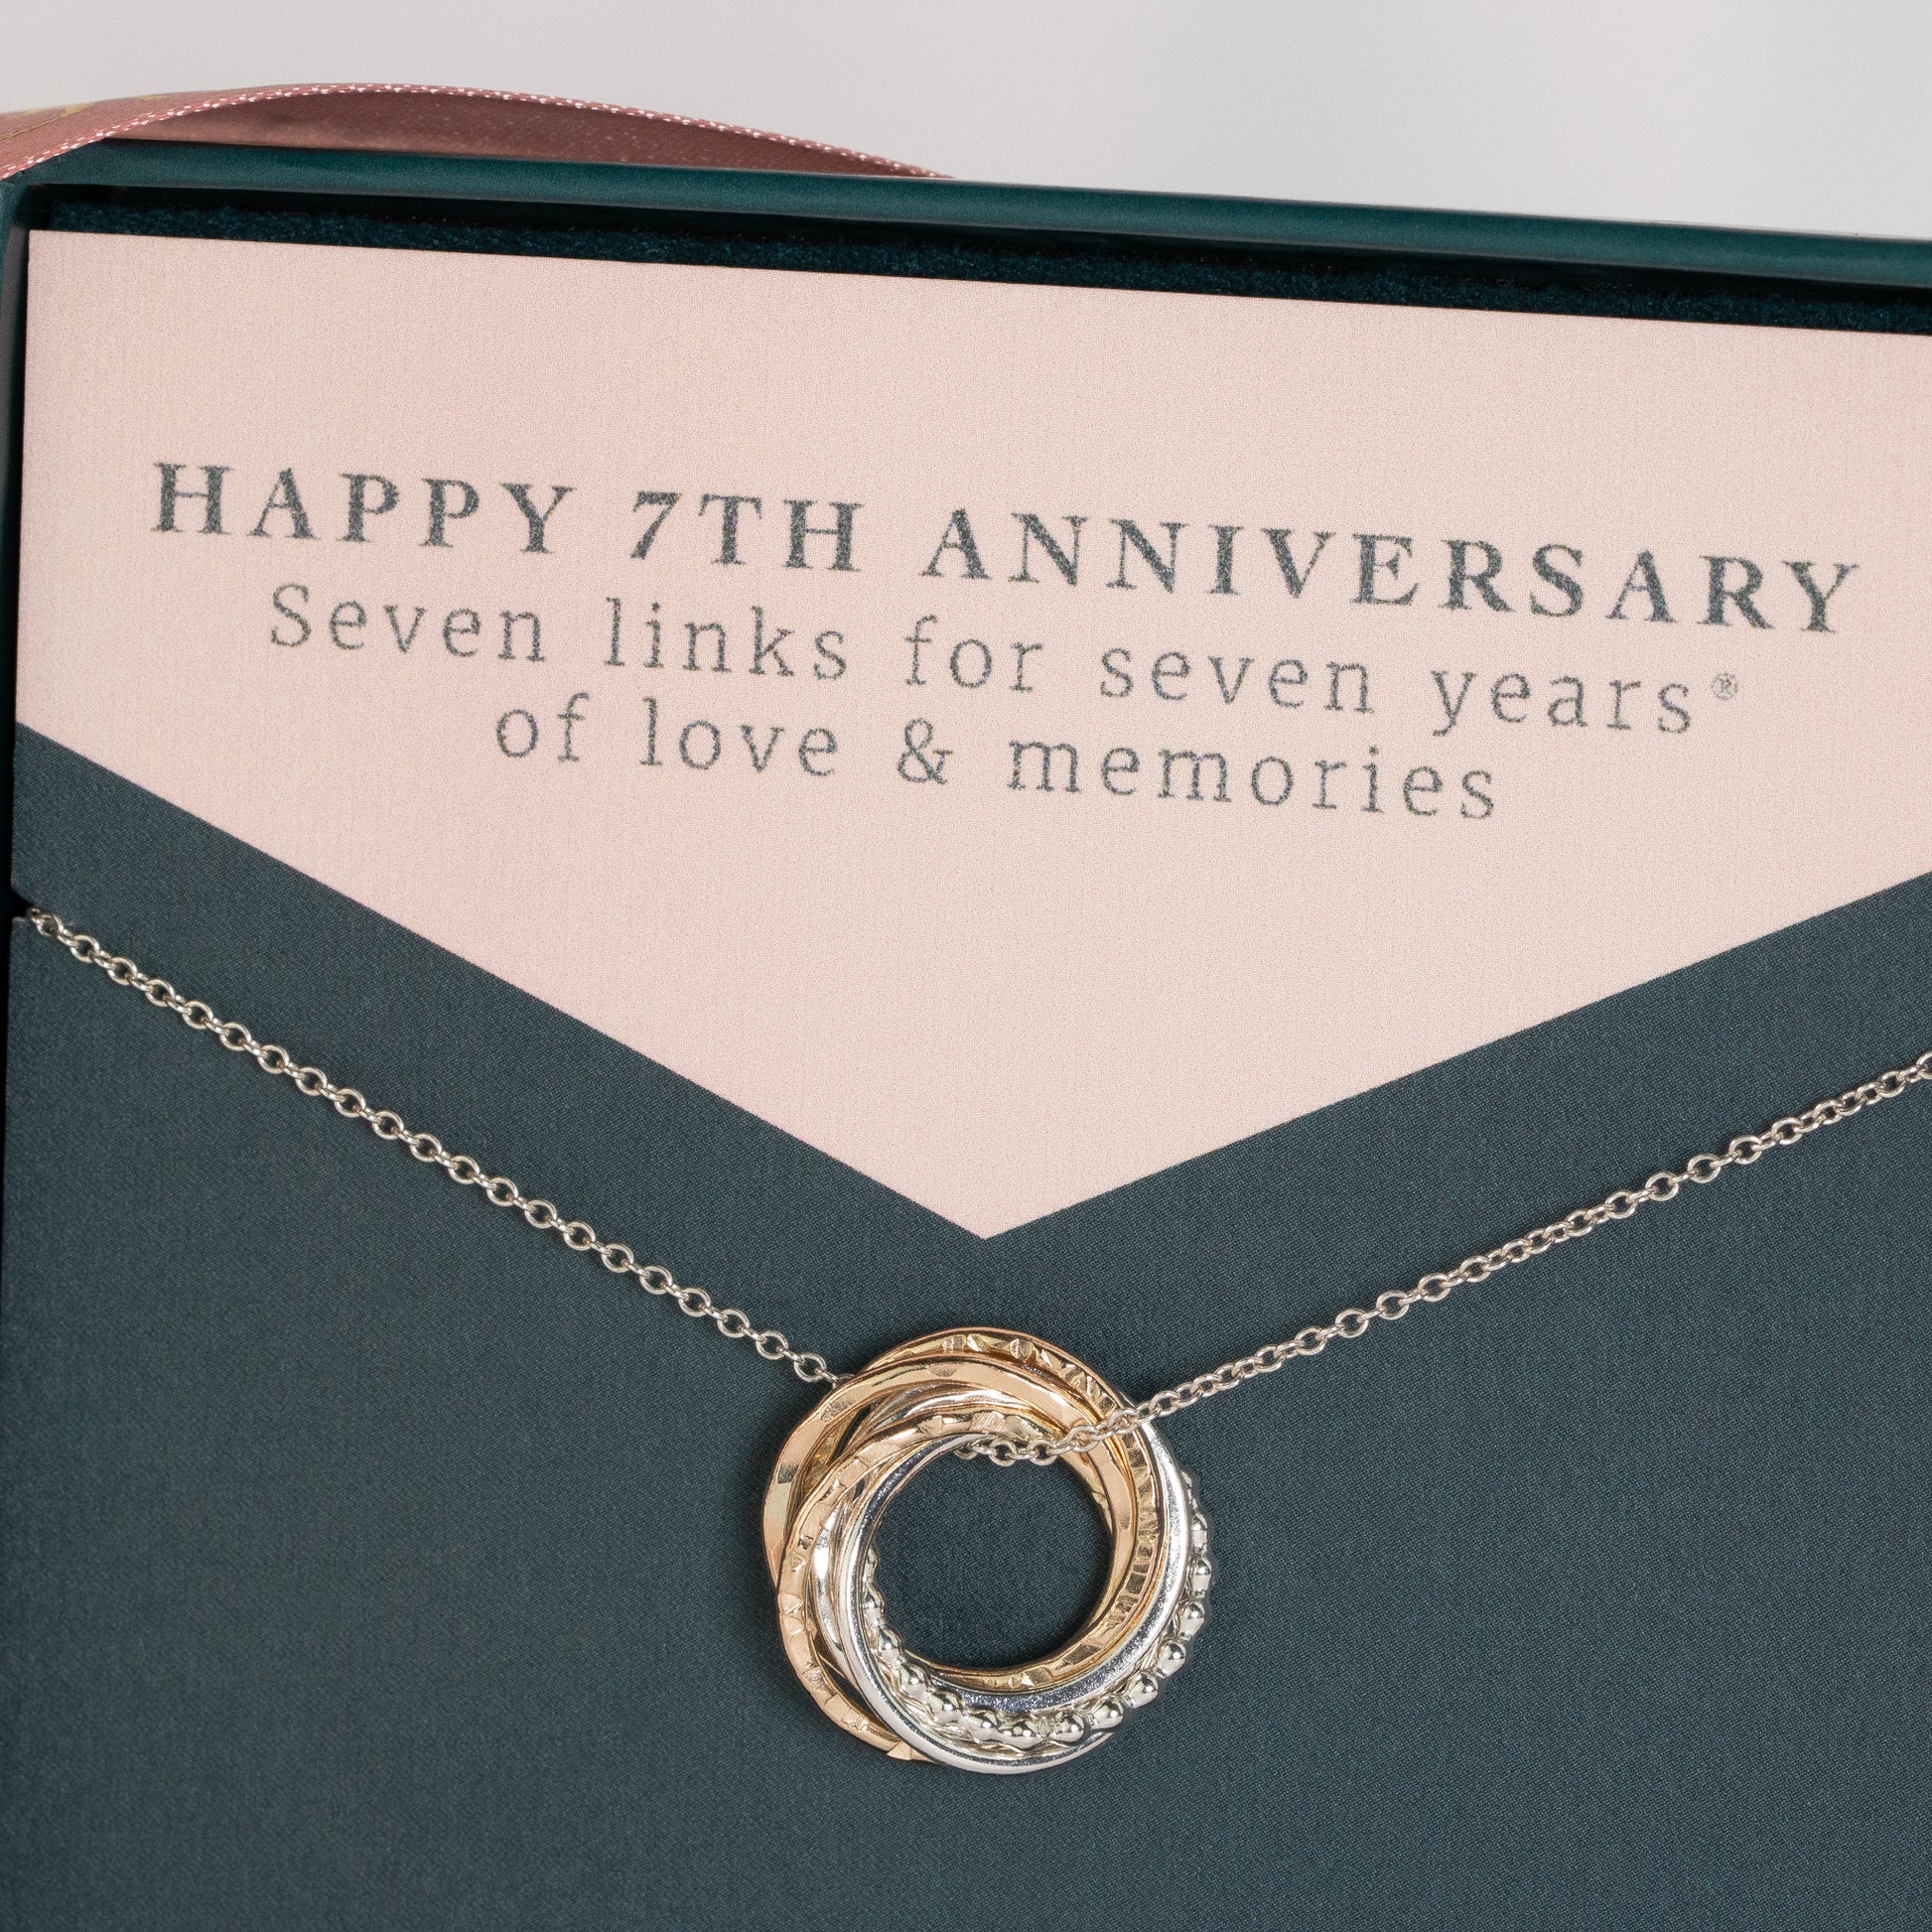 7th Anniversary Necklace - The Original 7 Rings for 7 Years Necklace - Silver & Gold